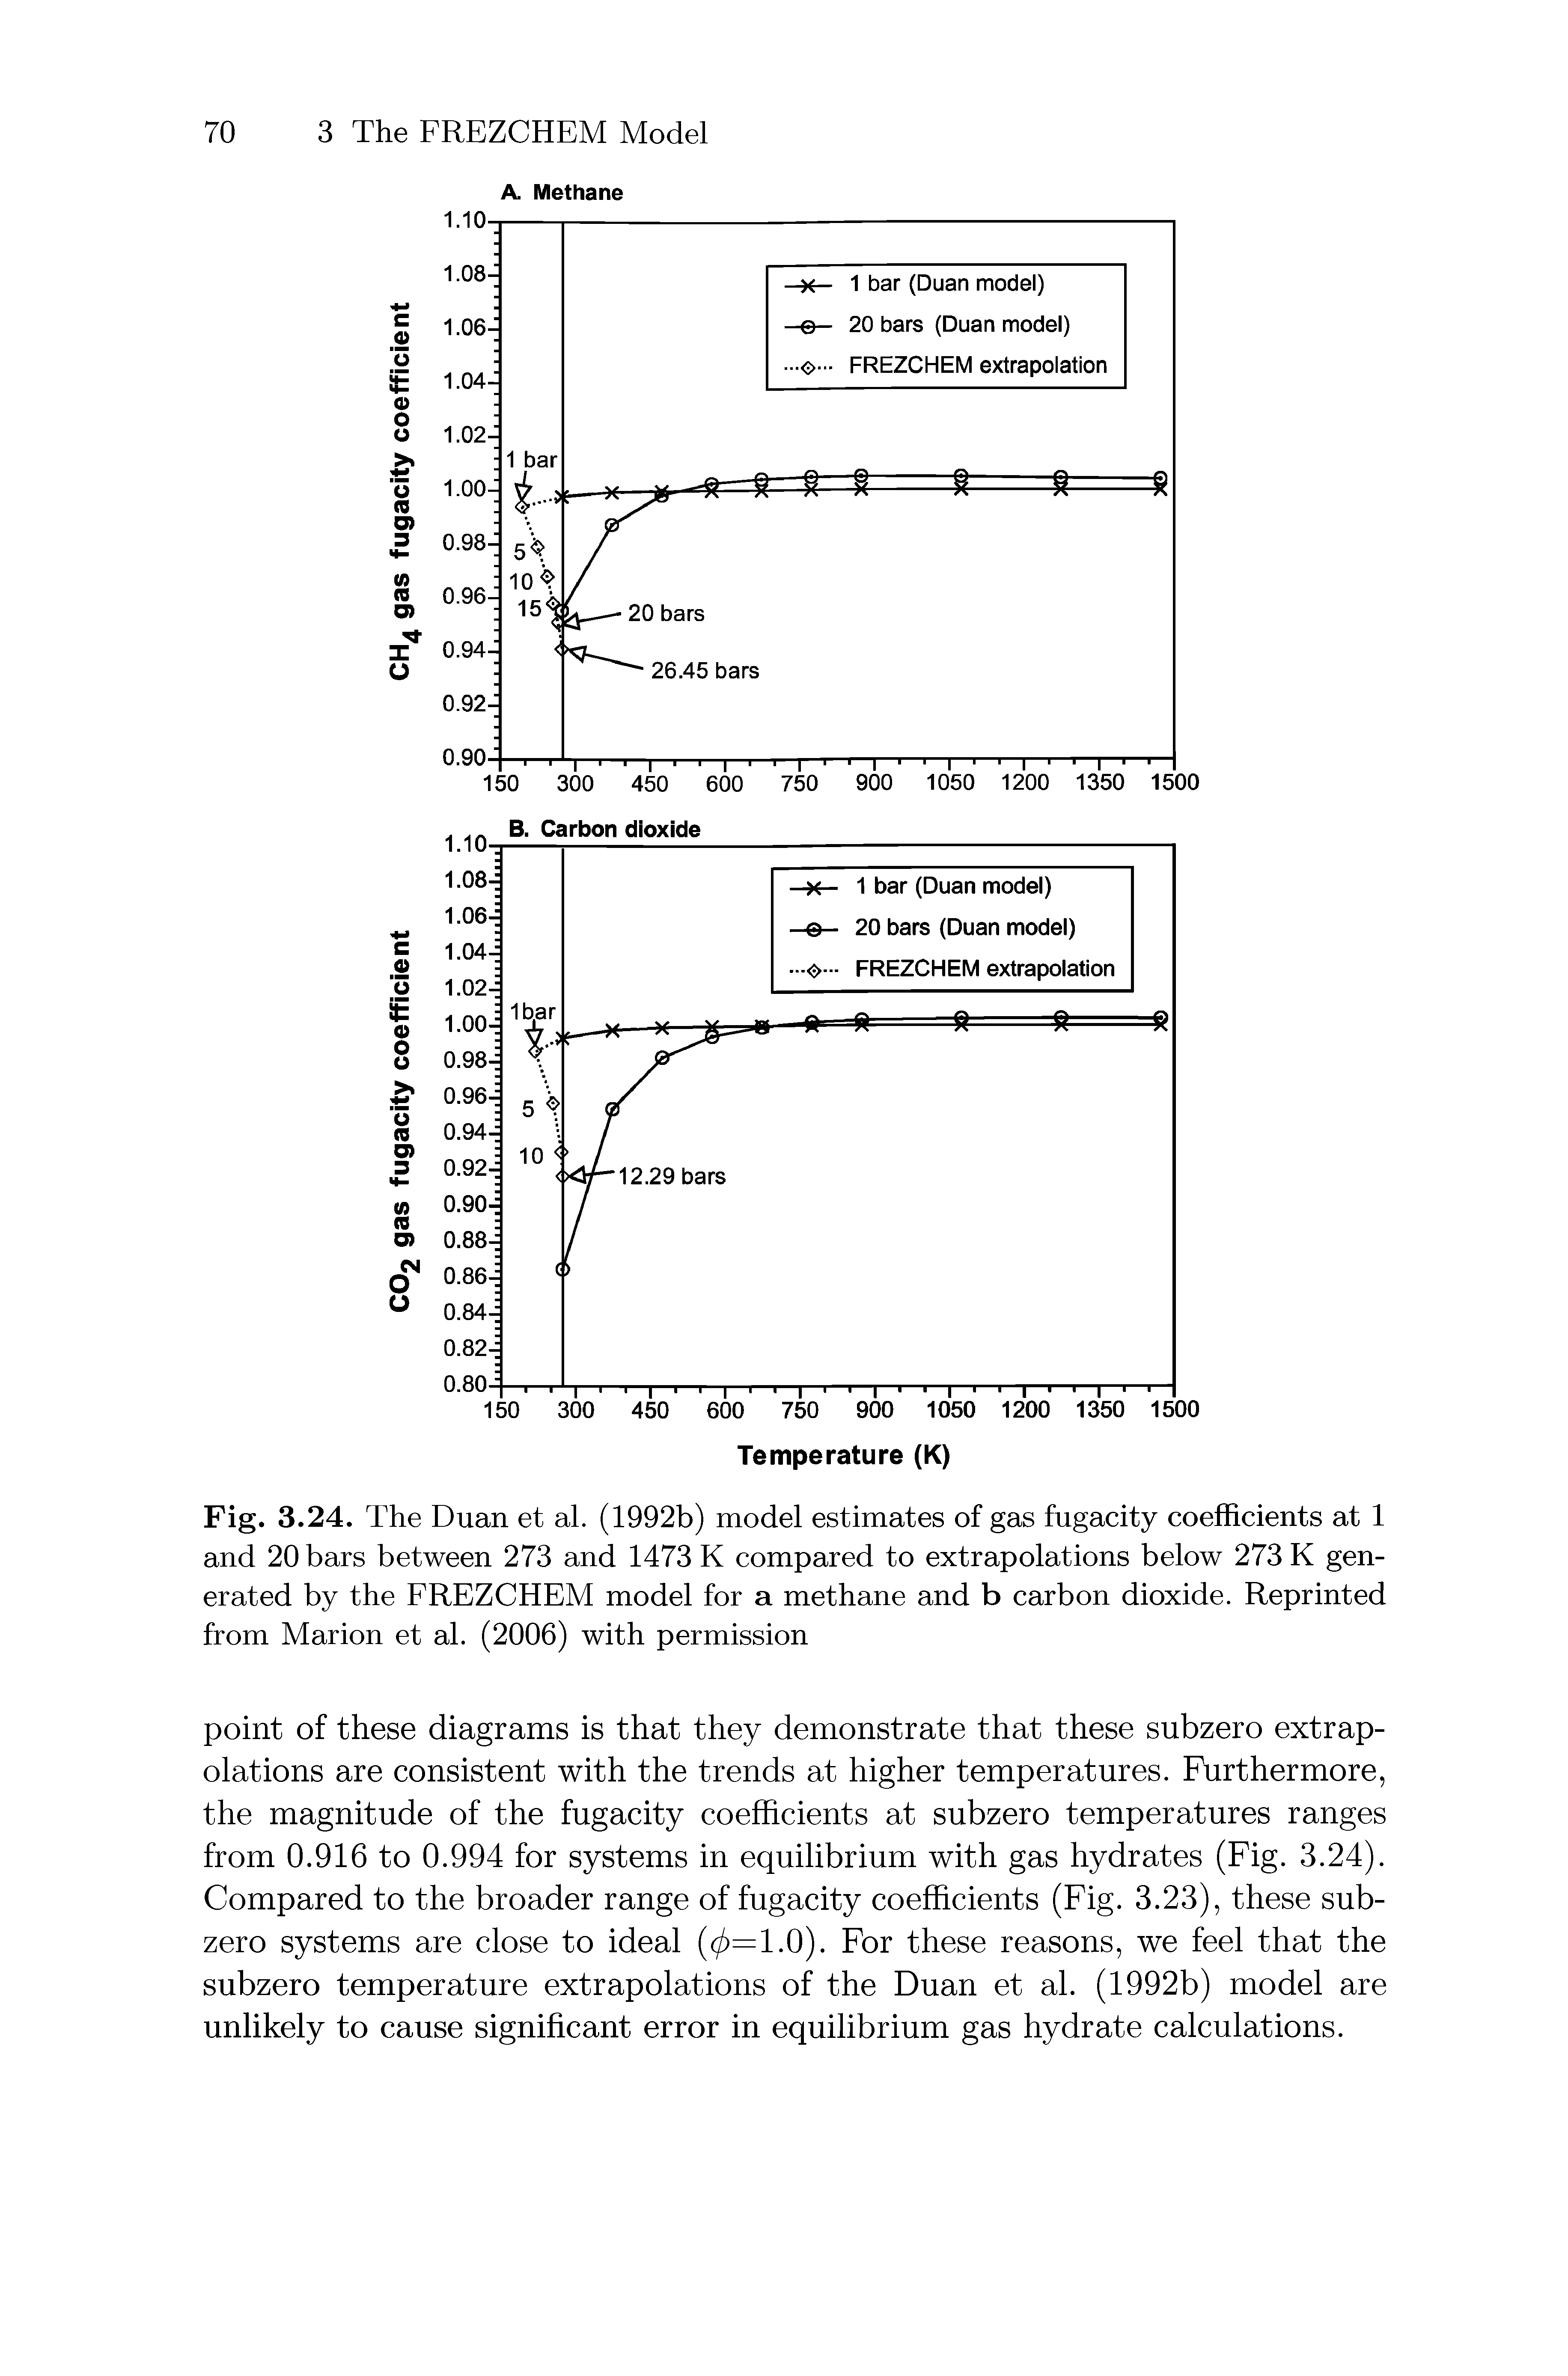 Fig. 3.24. The Duan et al. (1992b) model estimates of gas fugacity coefficients at 1 and 20 bars between 273 and 1473 K compared to extrapolations below 273 K generated by the FREZCHEM model for a methane and b carbon dioxide. Reprinted from Marion et al. (2006) with permission...